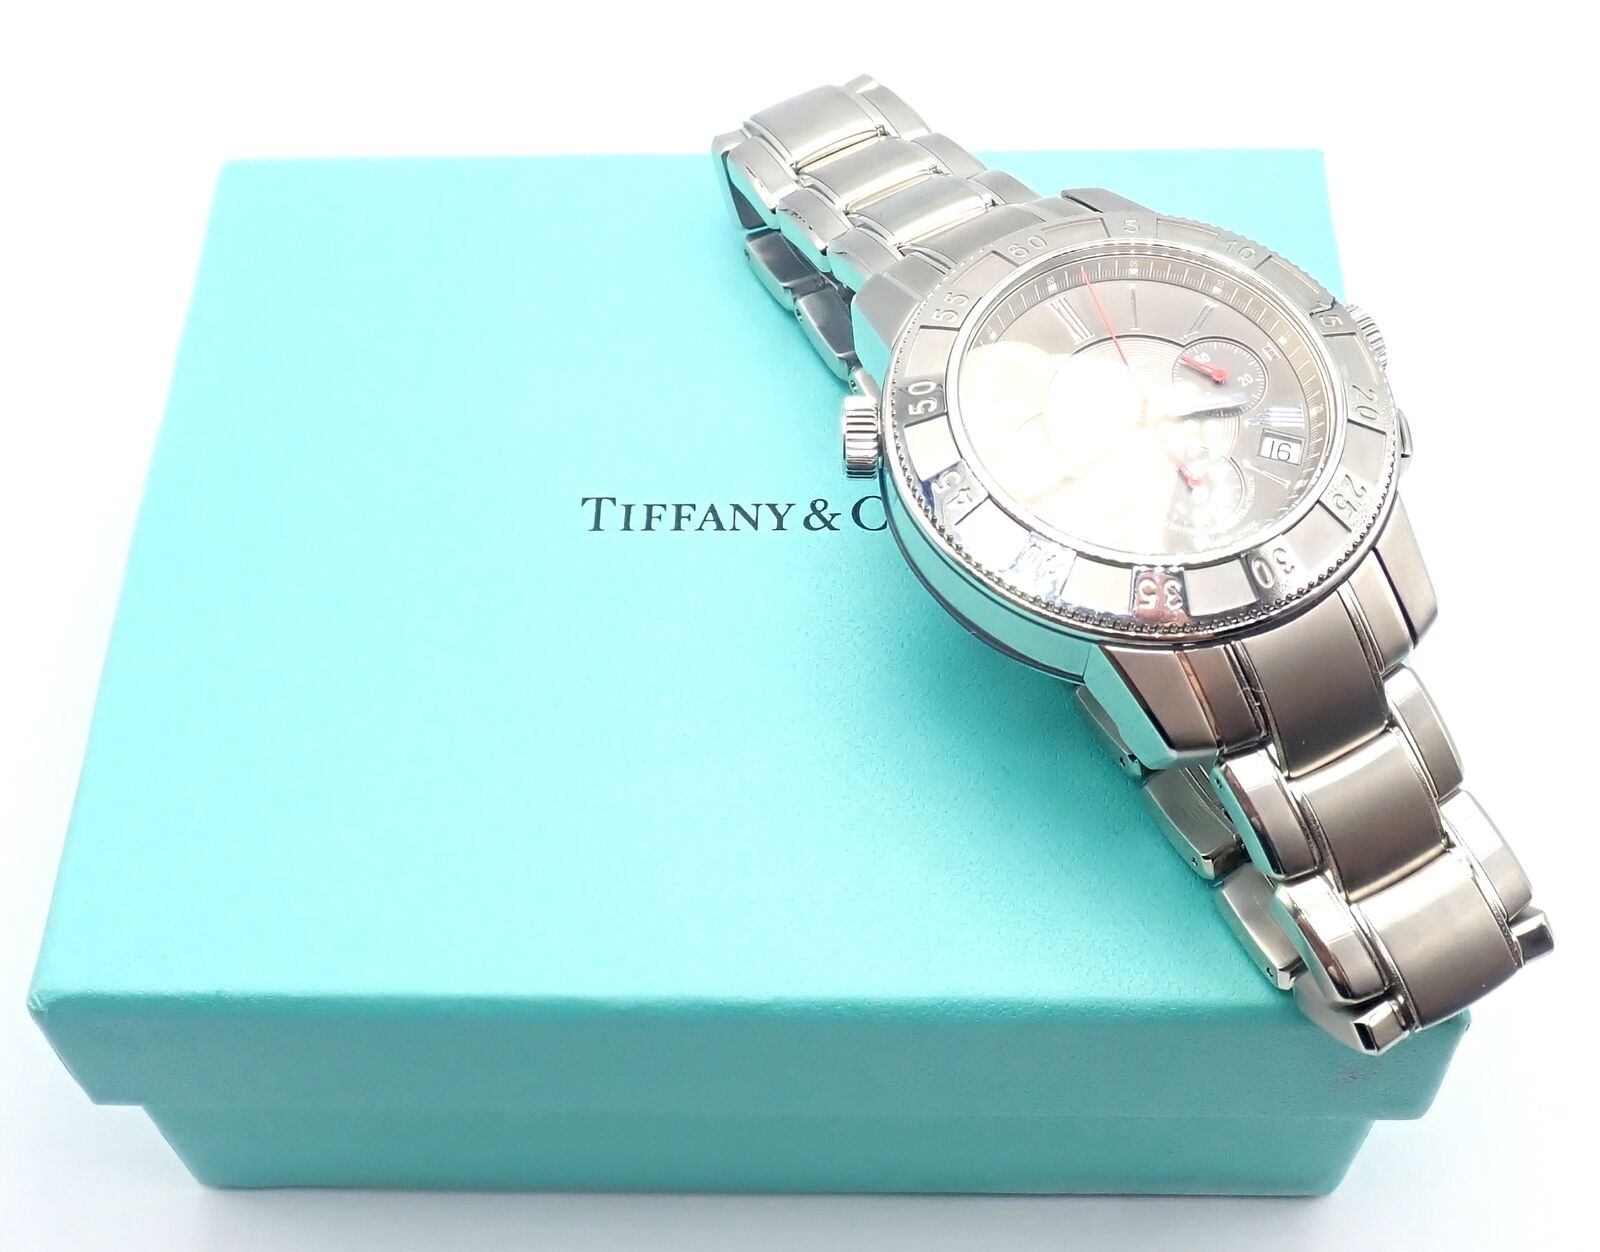 Tiffany & Co Jewelry & Watches:Watches, Parts & Accessories:Watches:Wristwatches Authentic! Tiffany & Co Mark T-57 Stainless Steel Chronograph Automatic Watch